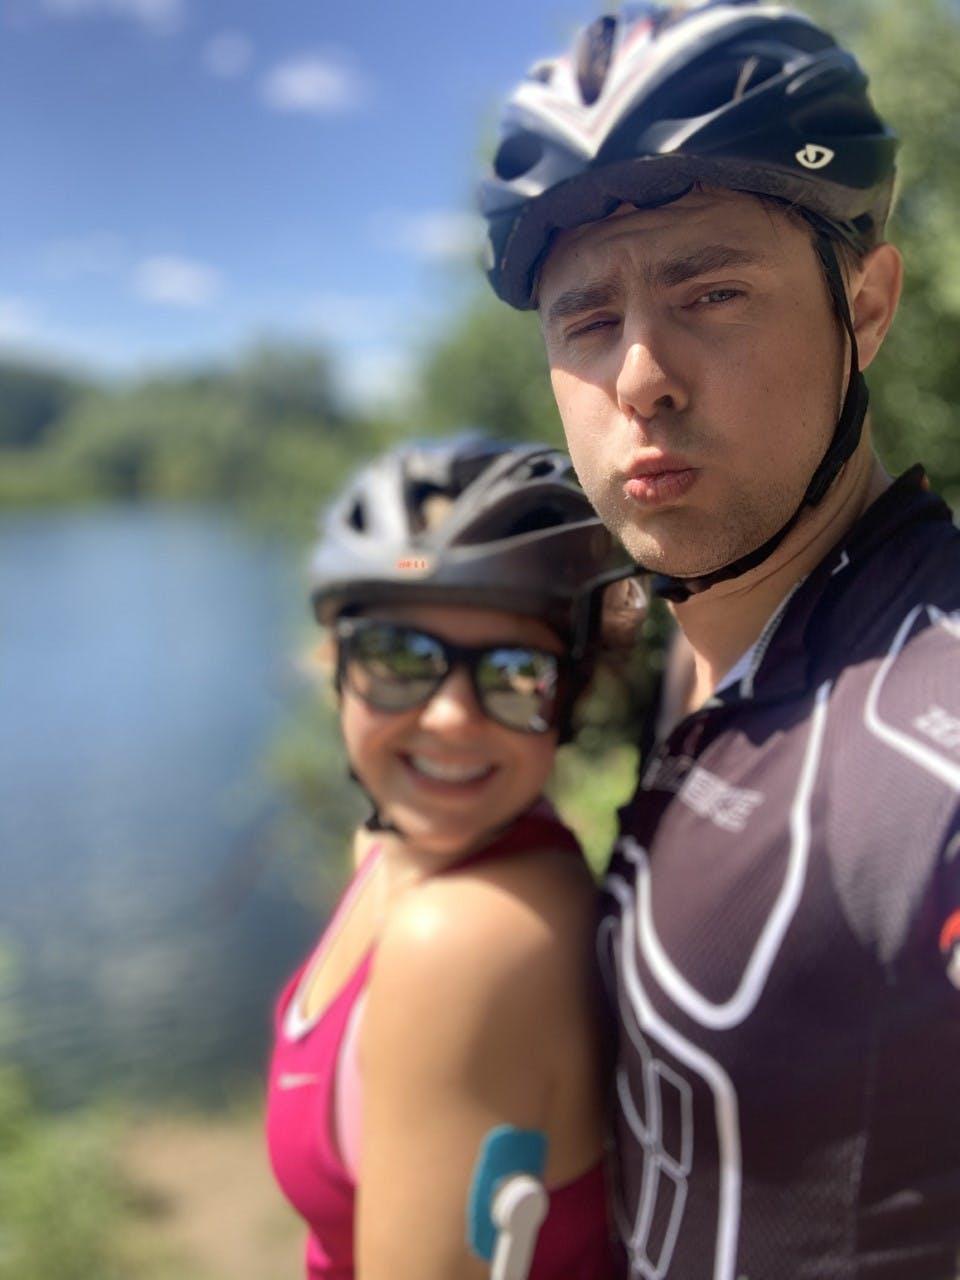 Jessica and her boyfriend posing in cycling helmets